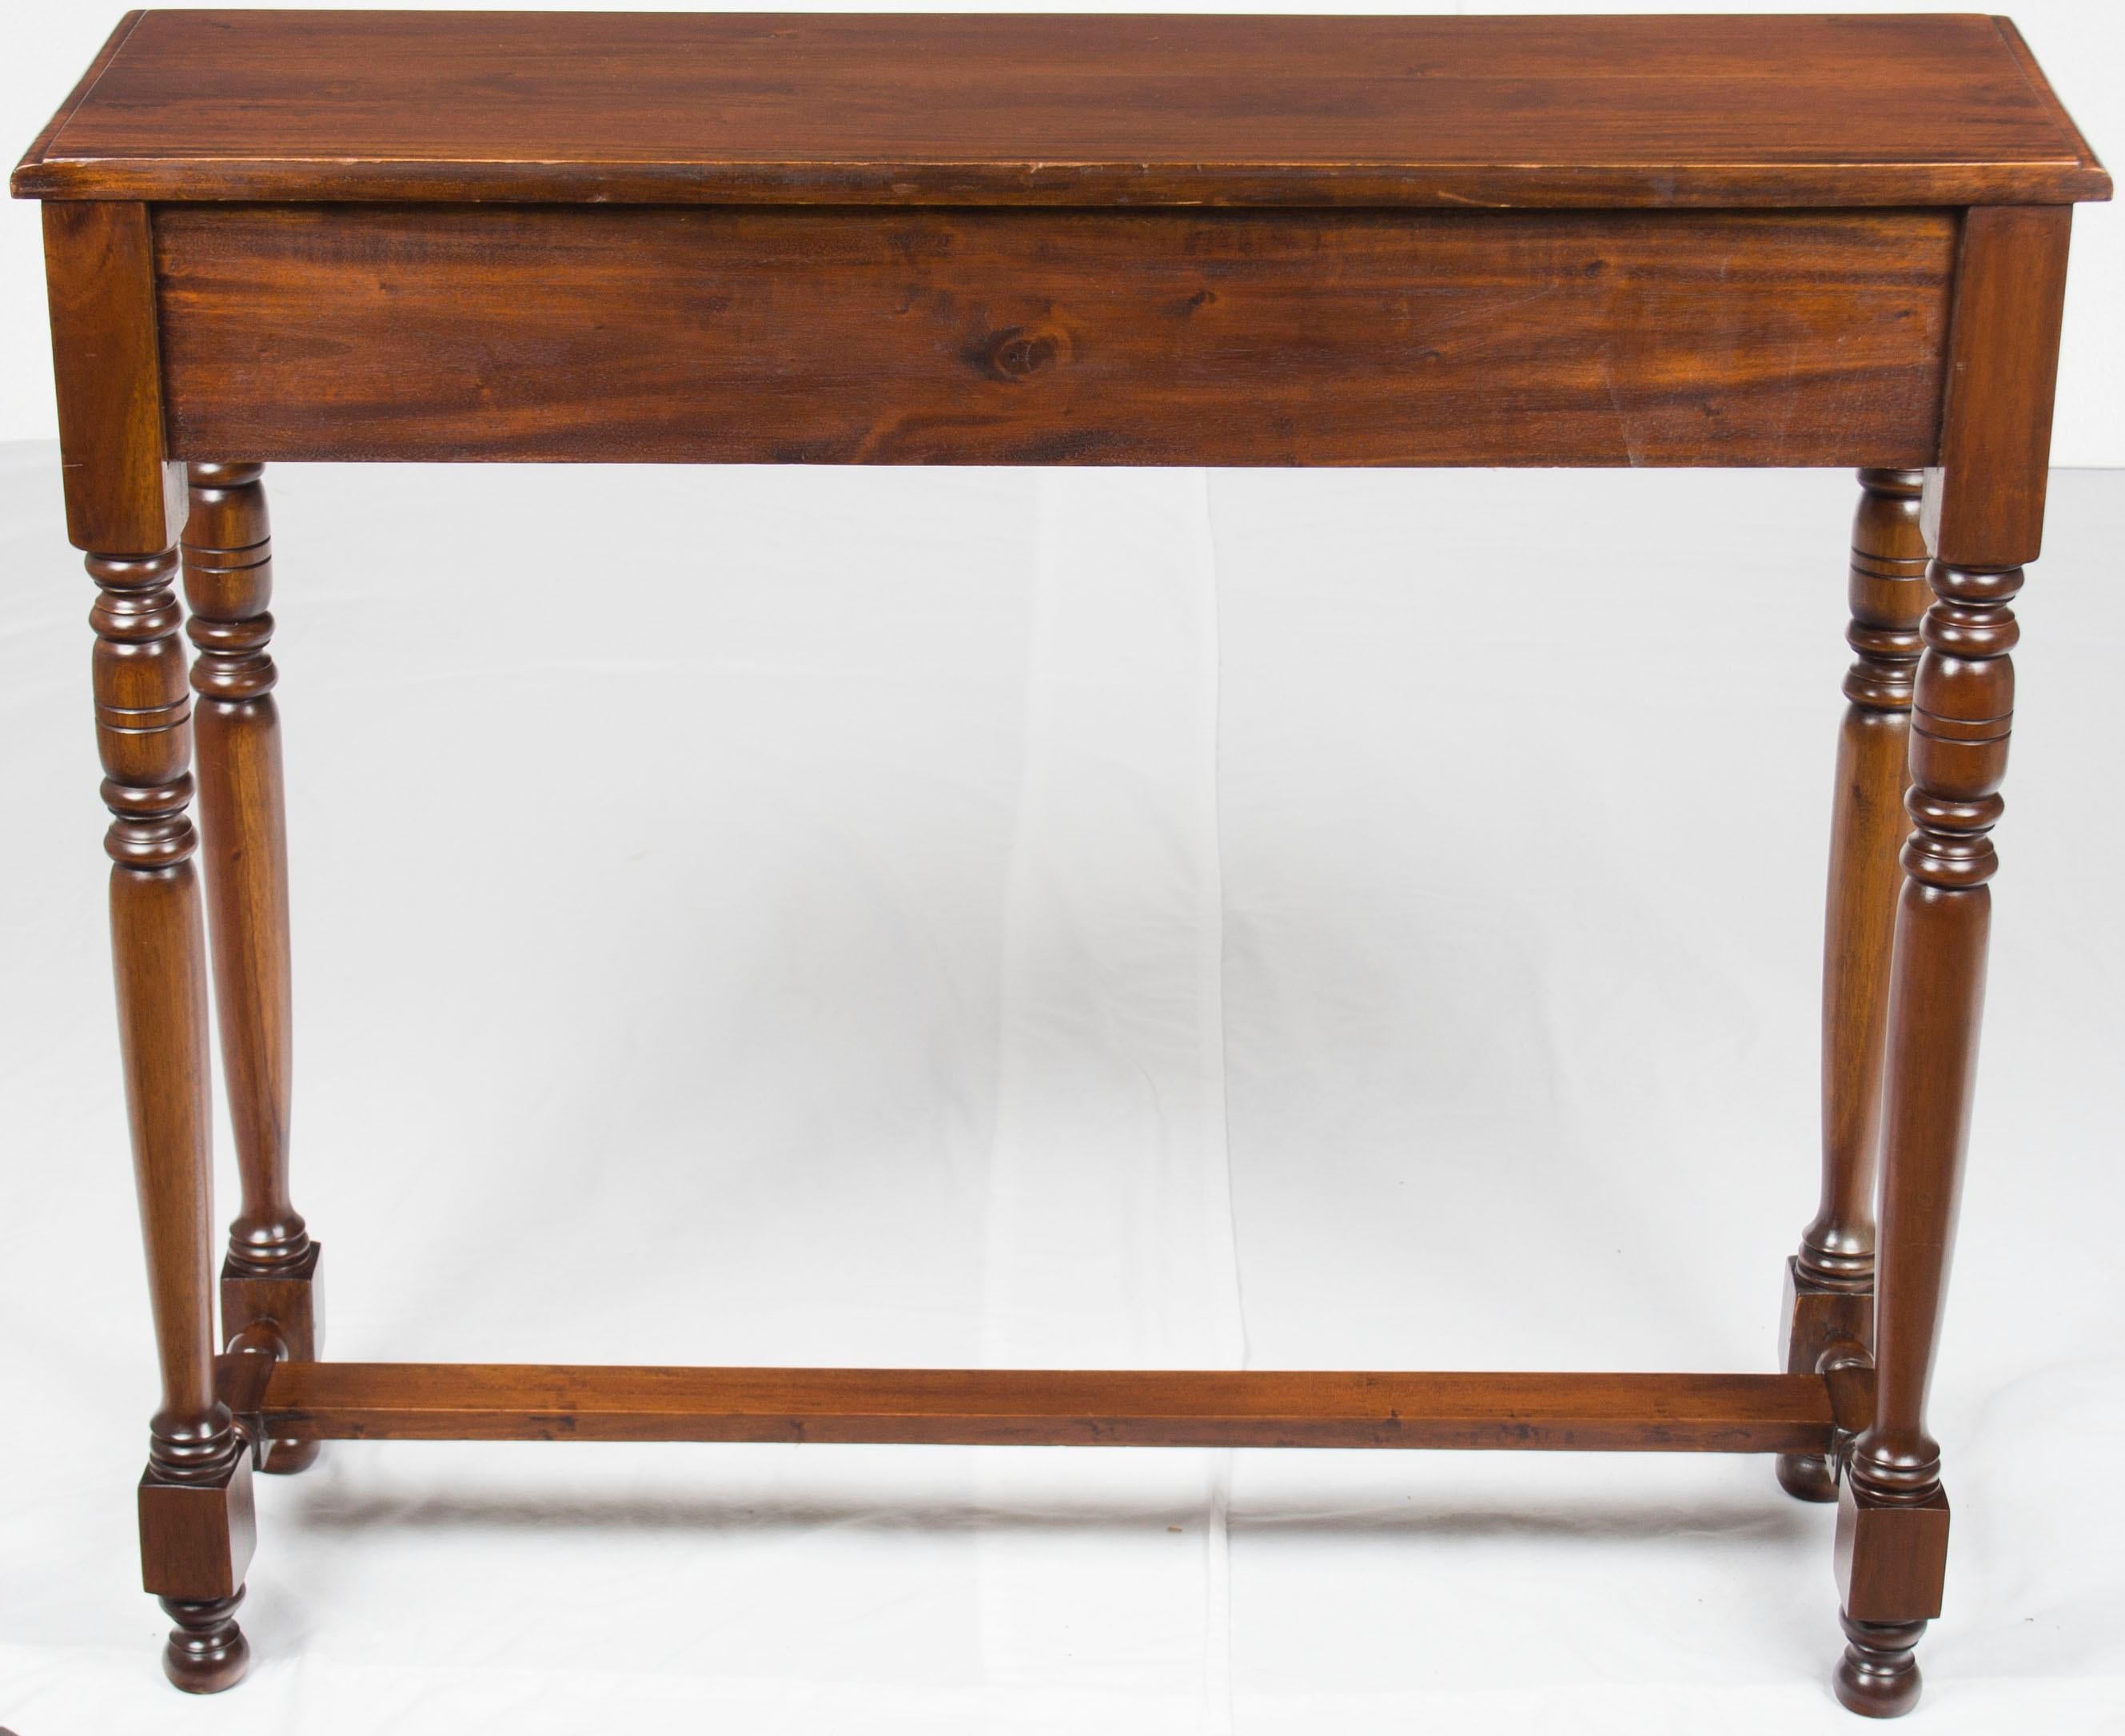 Mahogany Narrow Tall Sofa Console Table with Drawers For Sale 1